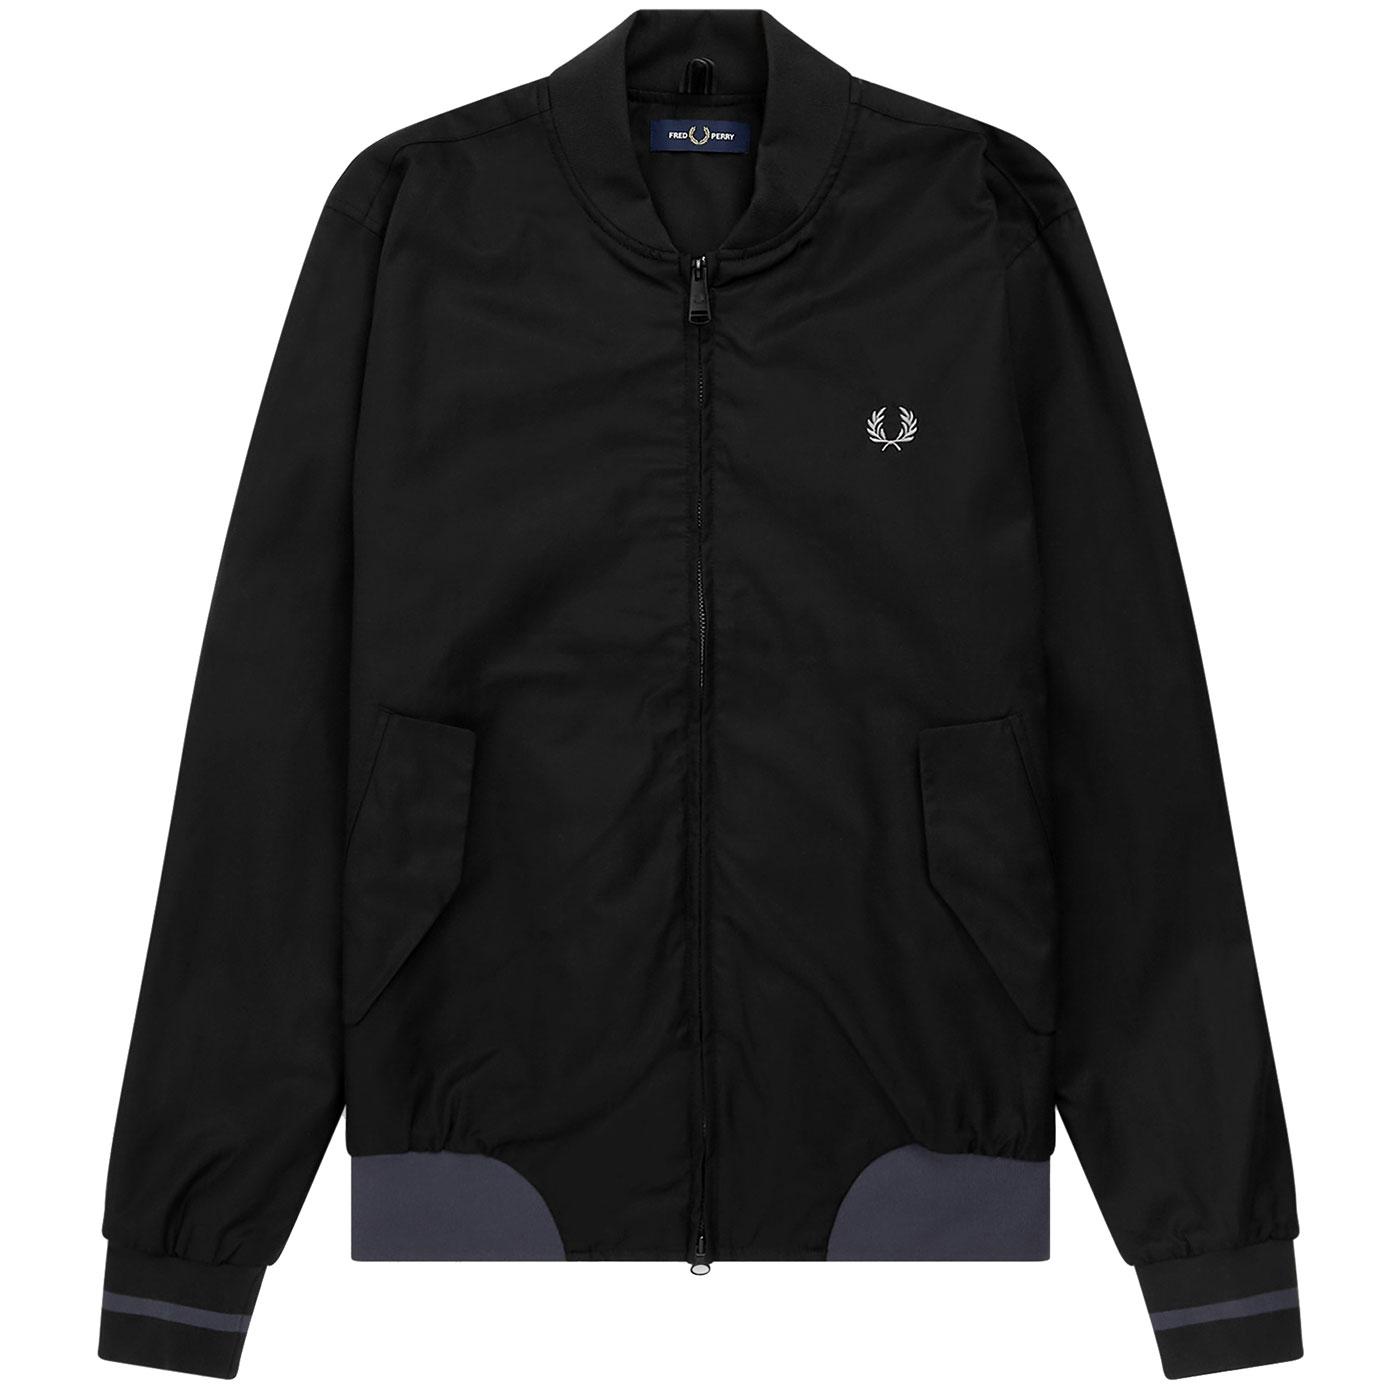 FRED PERRY Men's Retro Mod Twill Bomber Jacket in Black